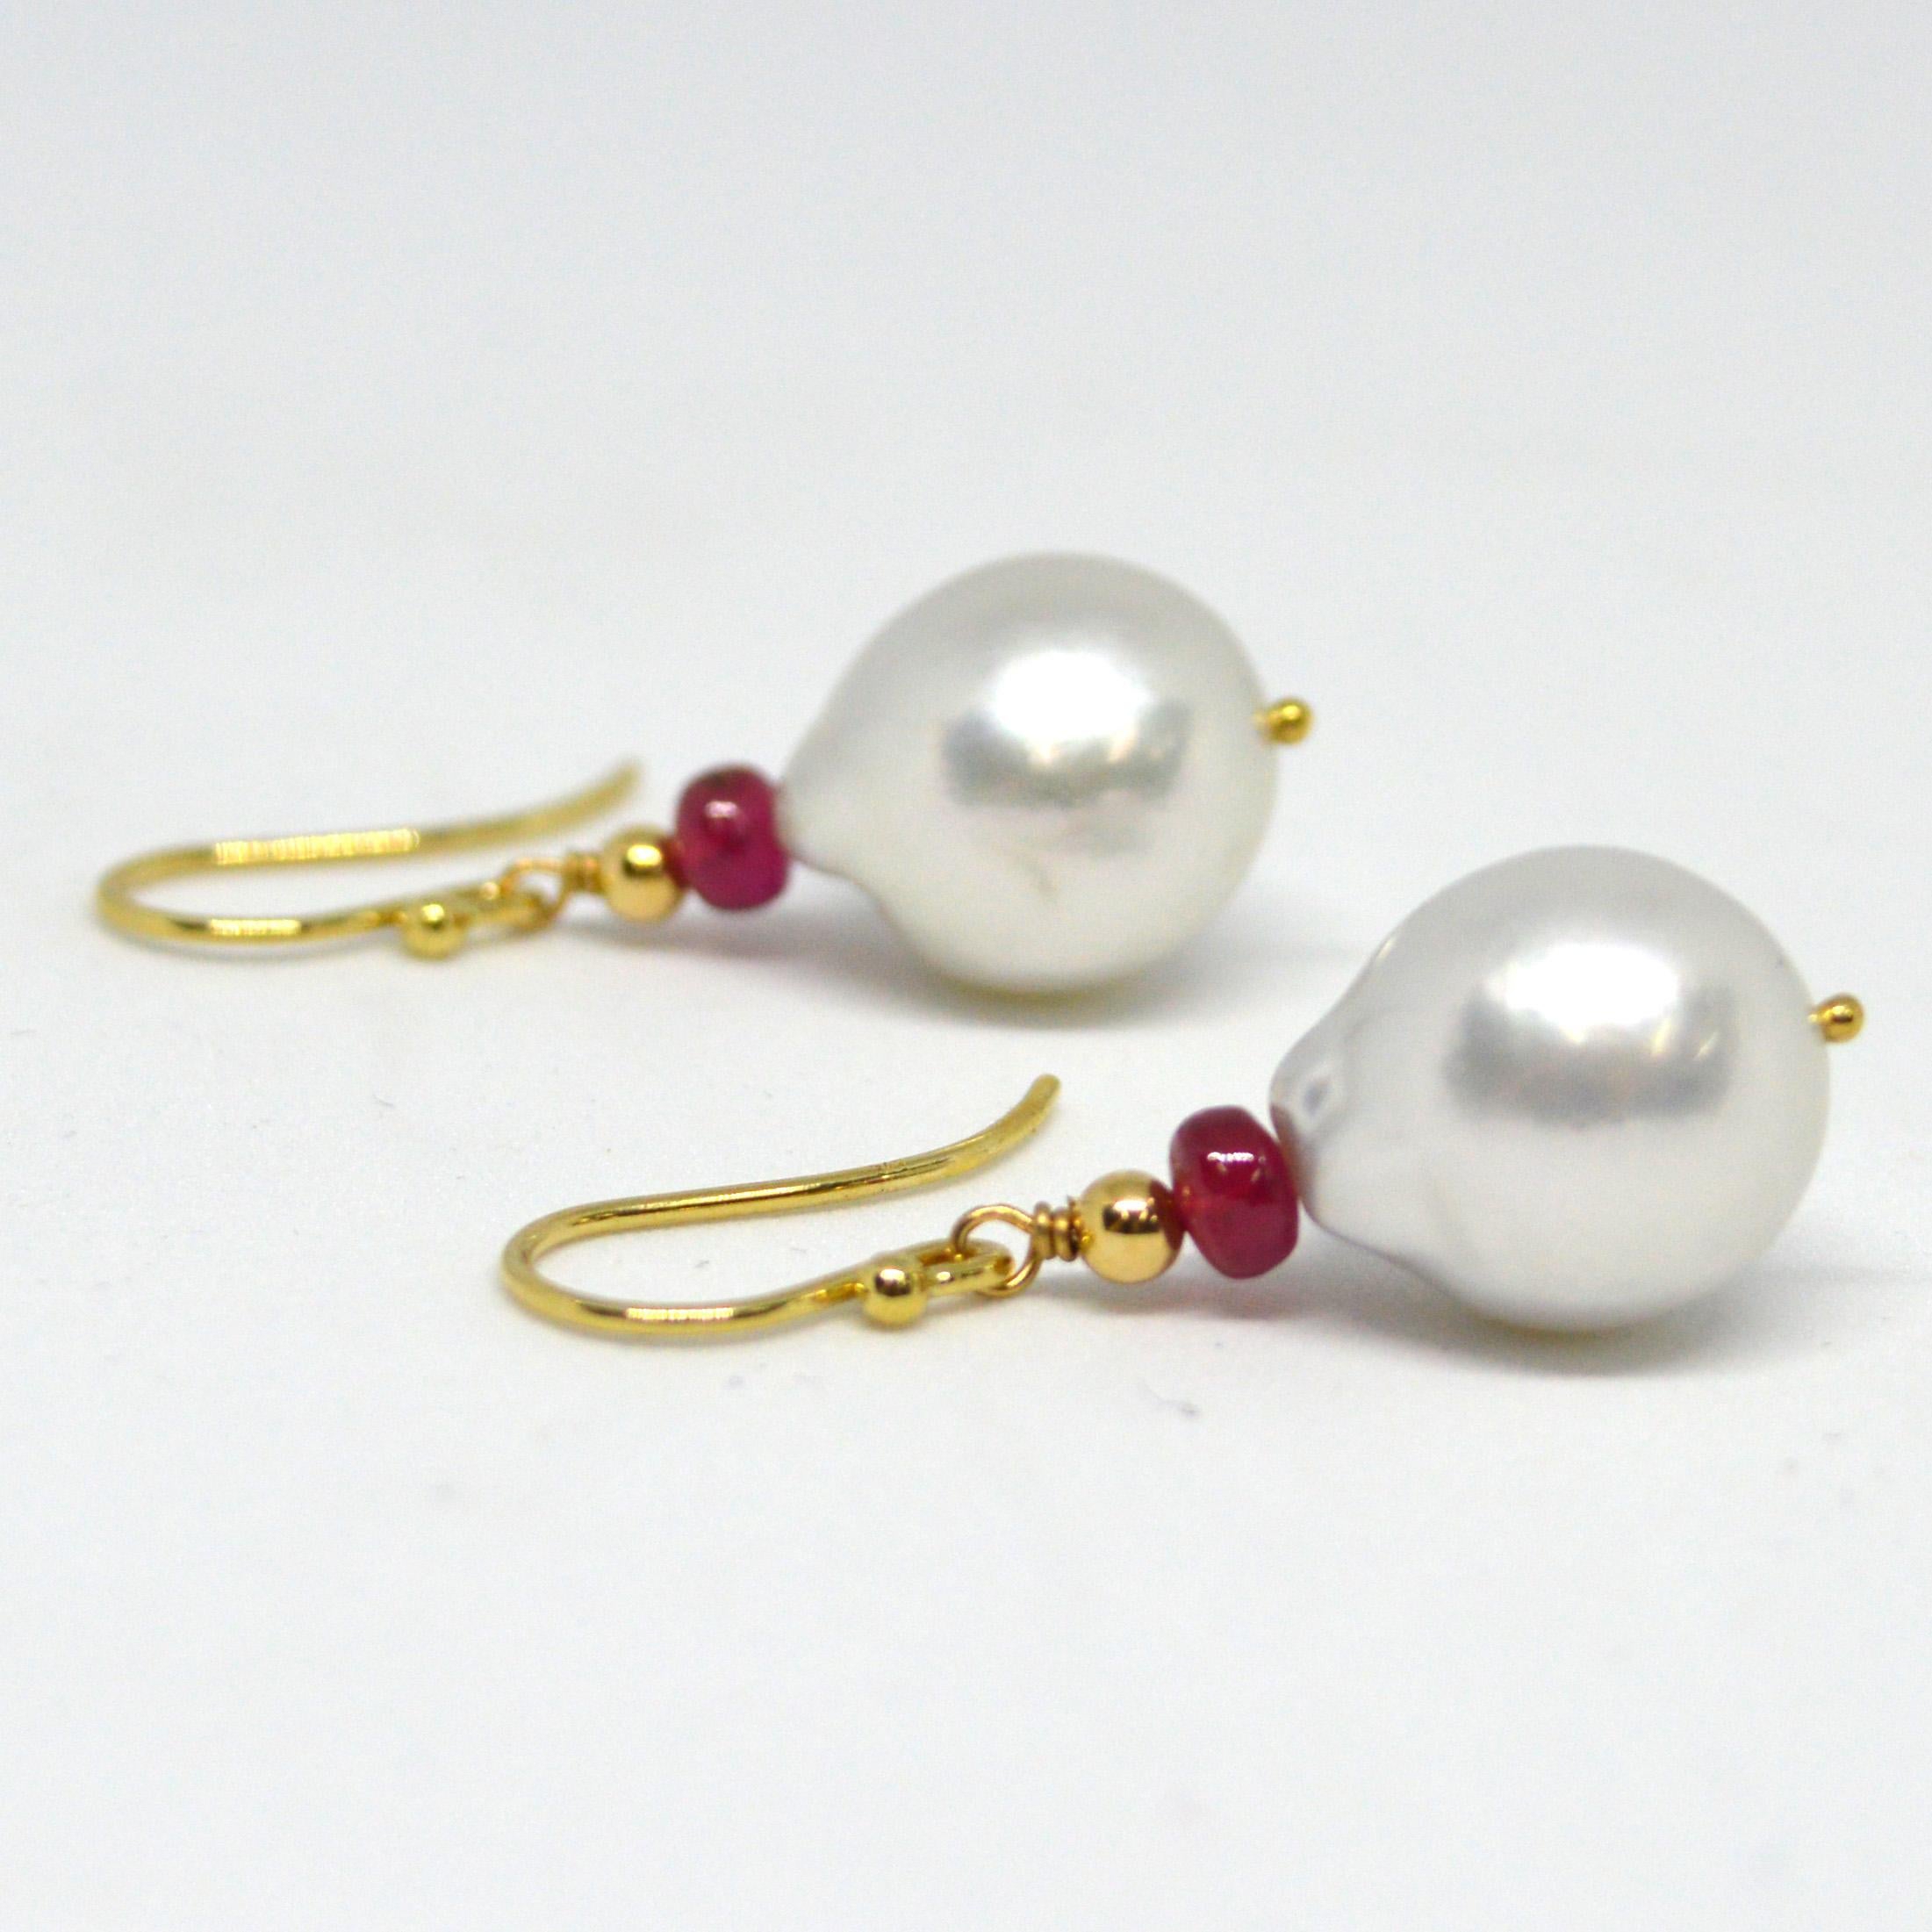 Natural Brazilian Rubies 3x4mm with 15x12.7mm high sheen South Sea Pearls set on 9ct yellow Gold Sheppard,  14k Gold head pin and 3mm round bead.

Total Earring length 36mm.